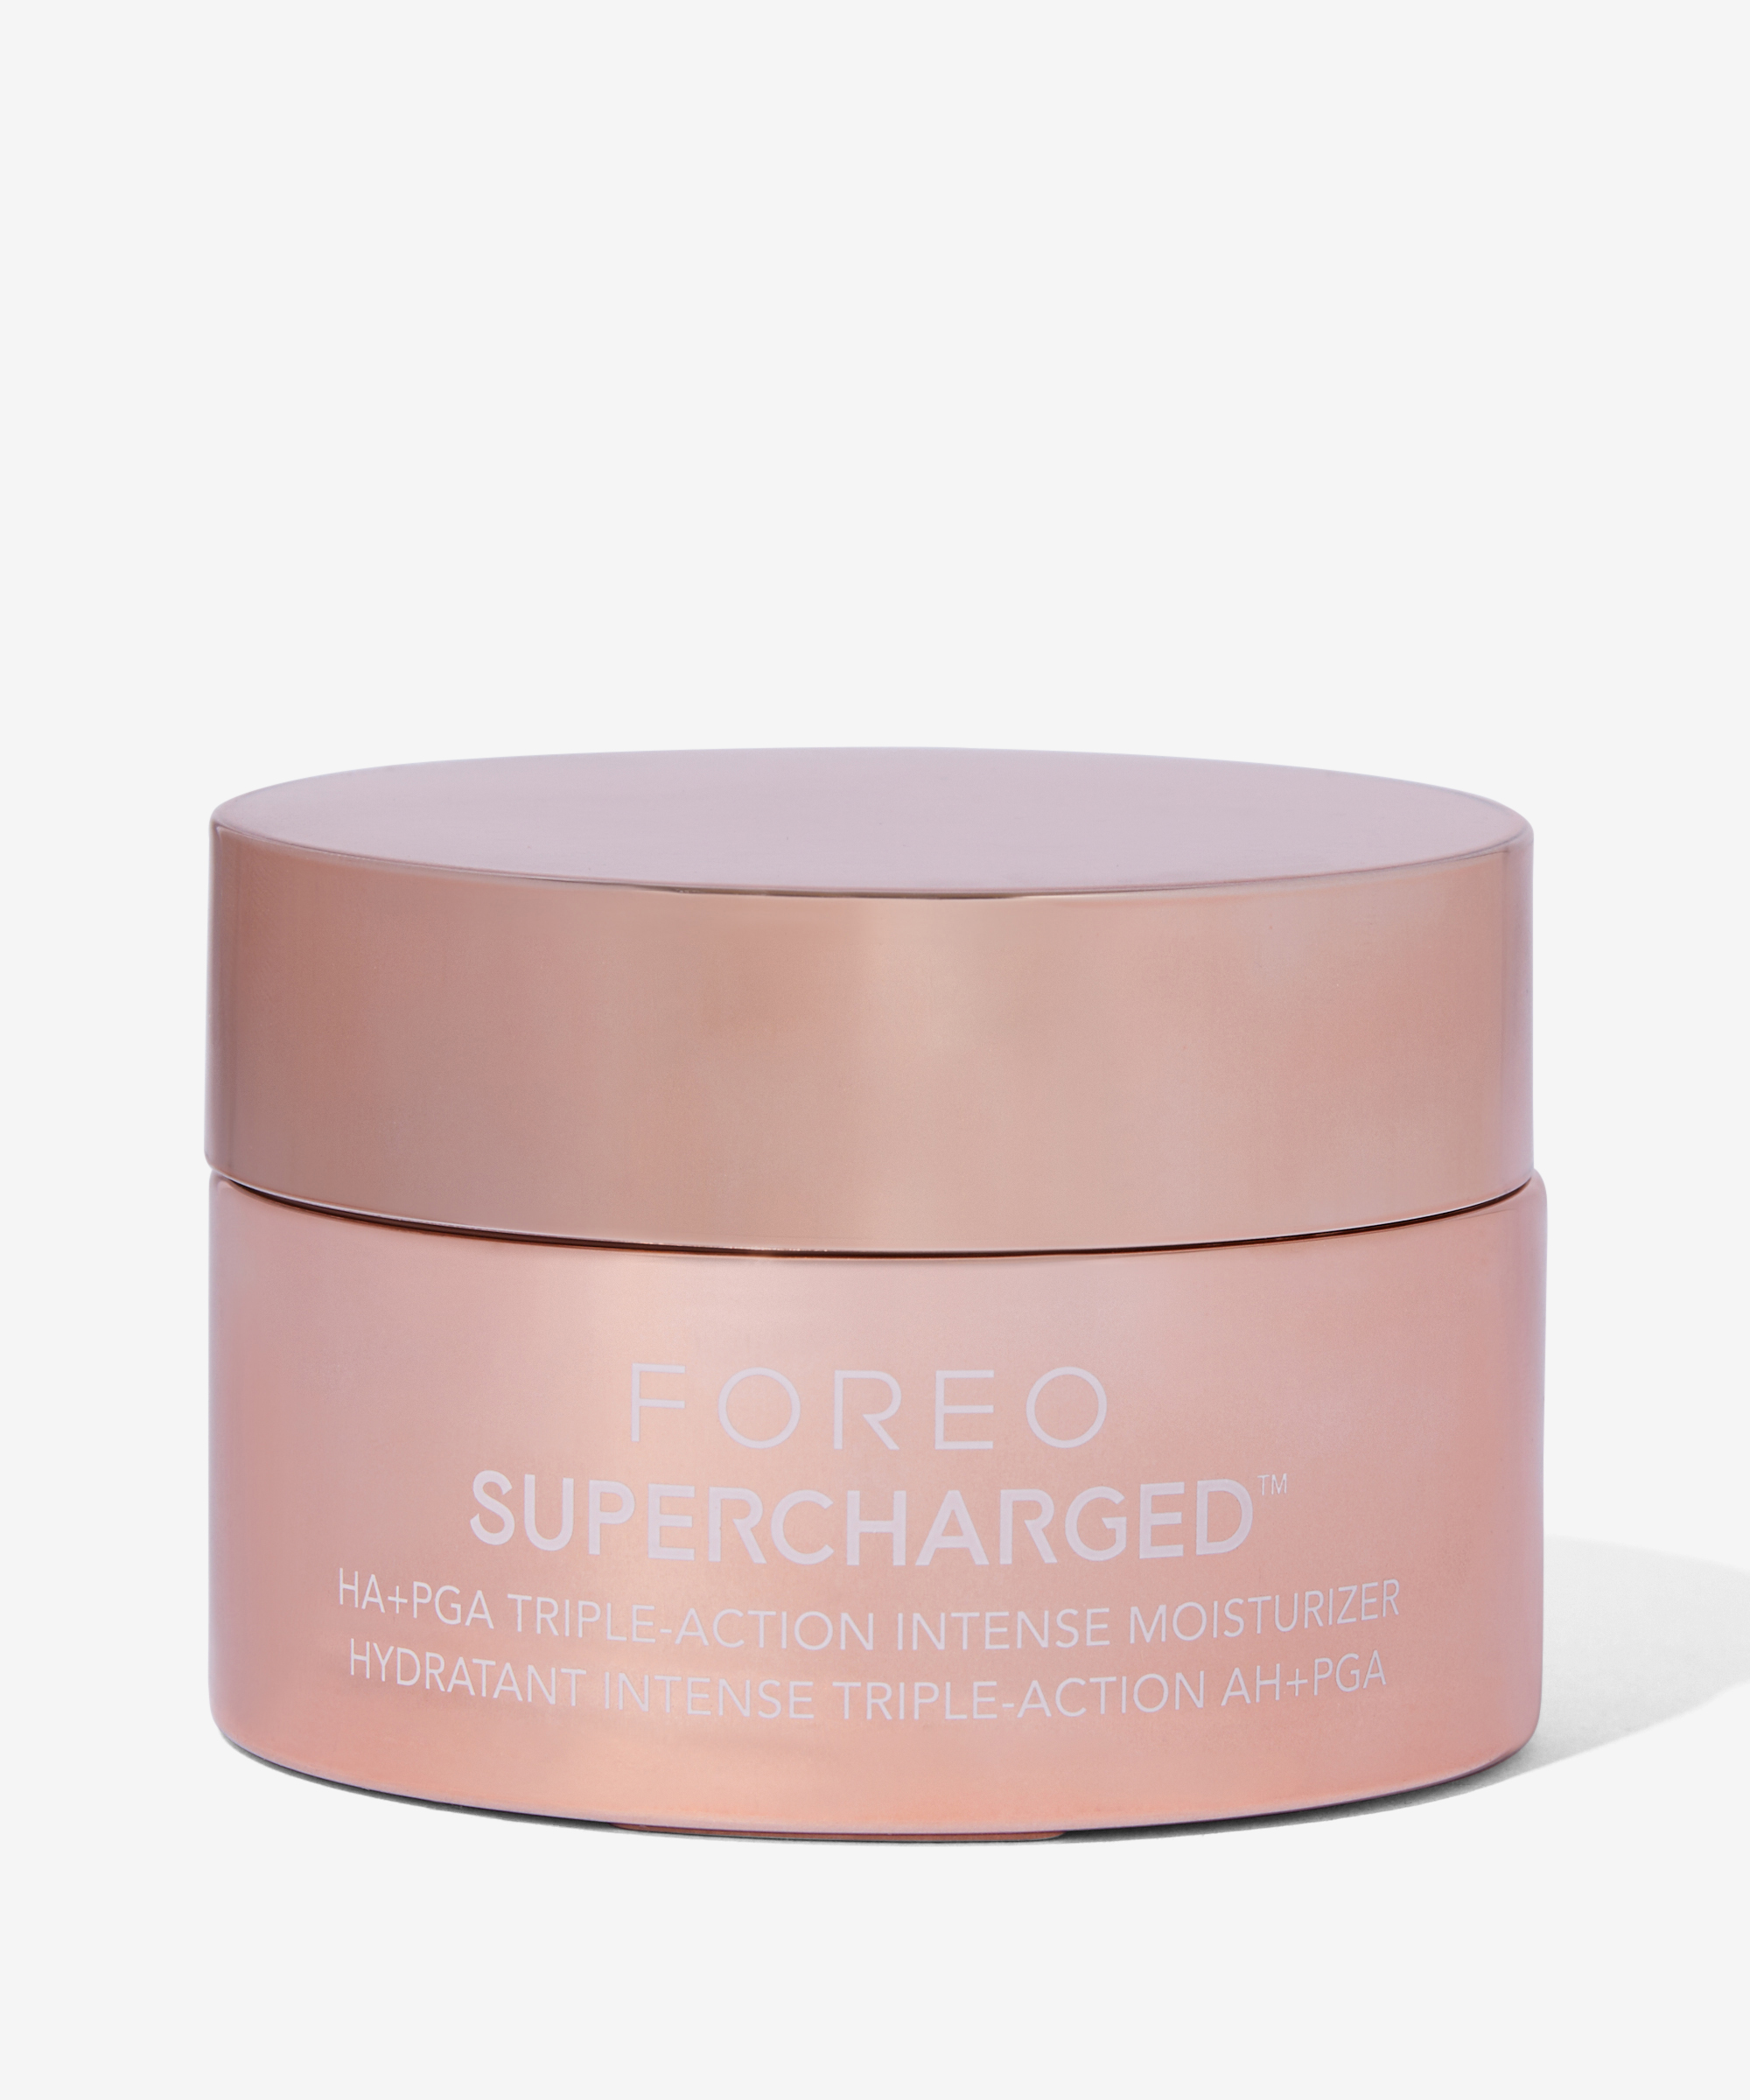 Foreo SUPERCHARGED HA+PGA Moisturizer Action at Intense BAY Triple BEAUTY